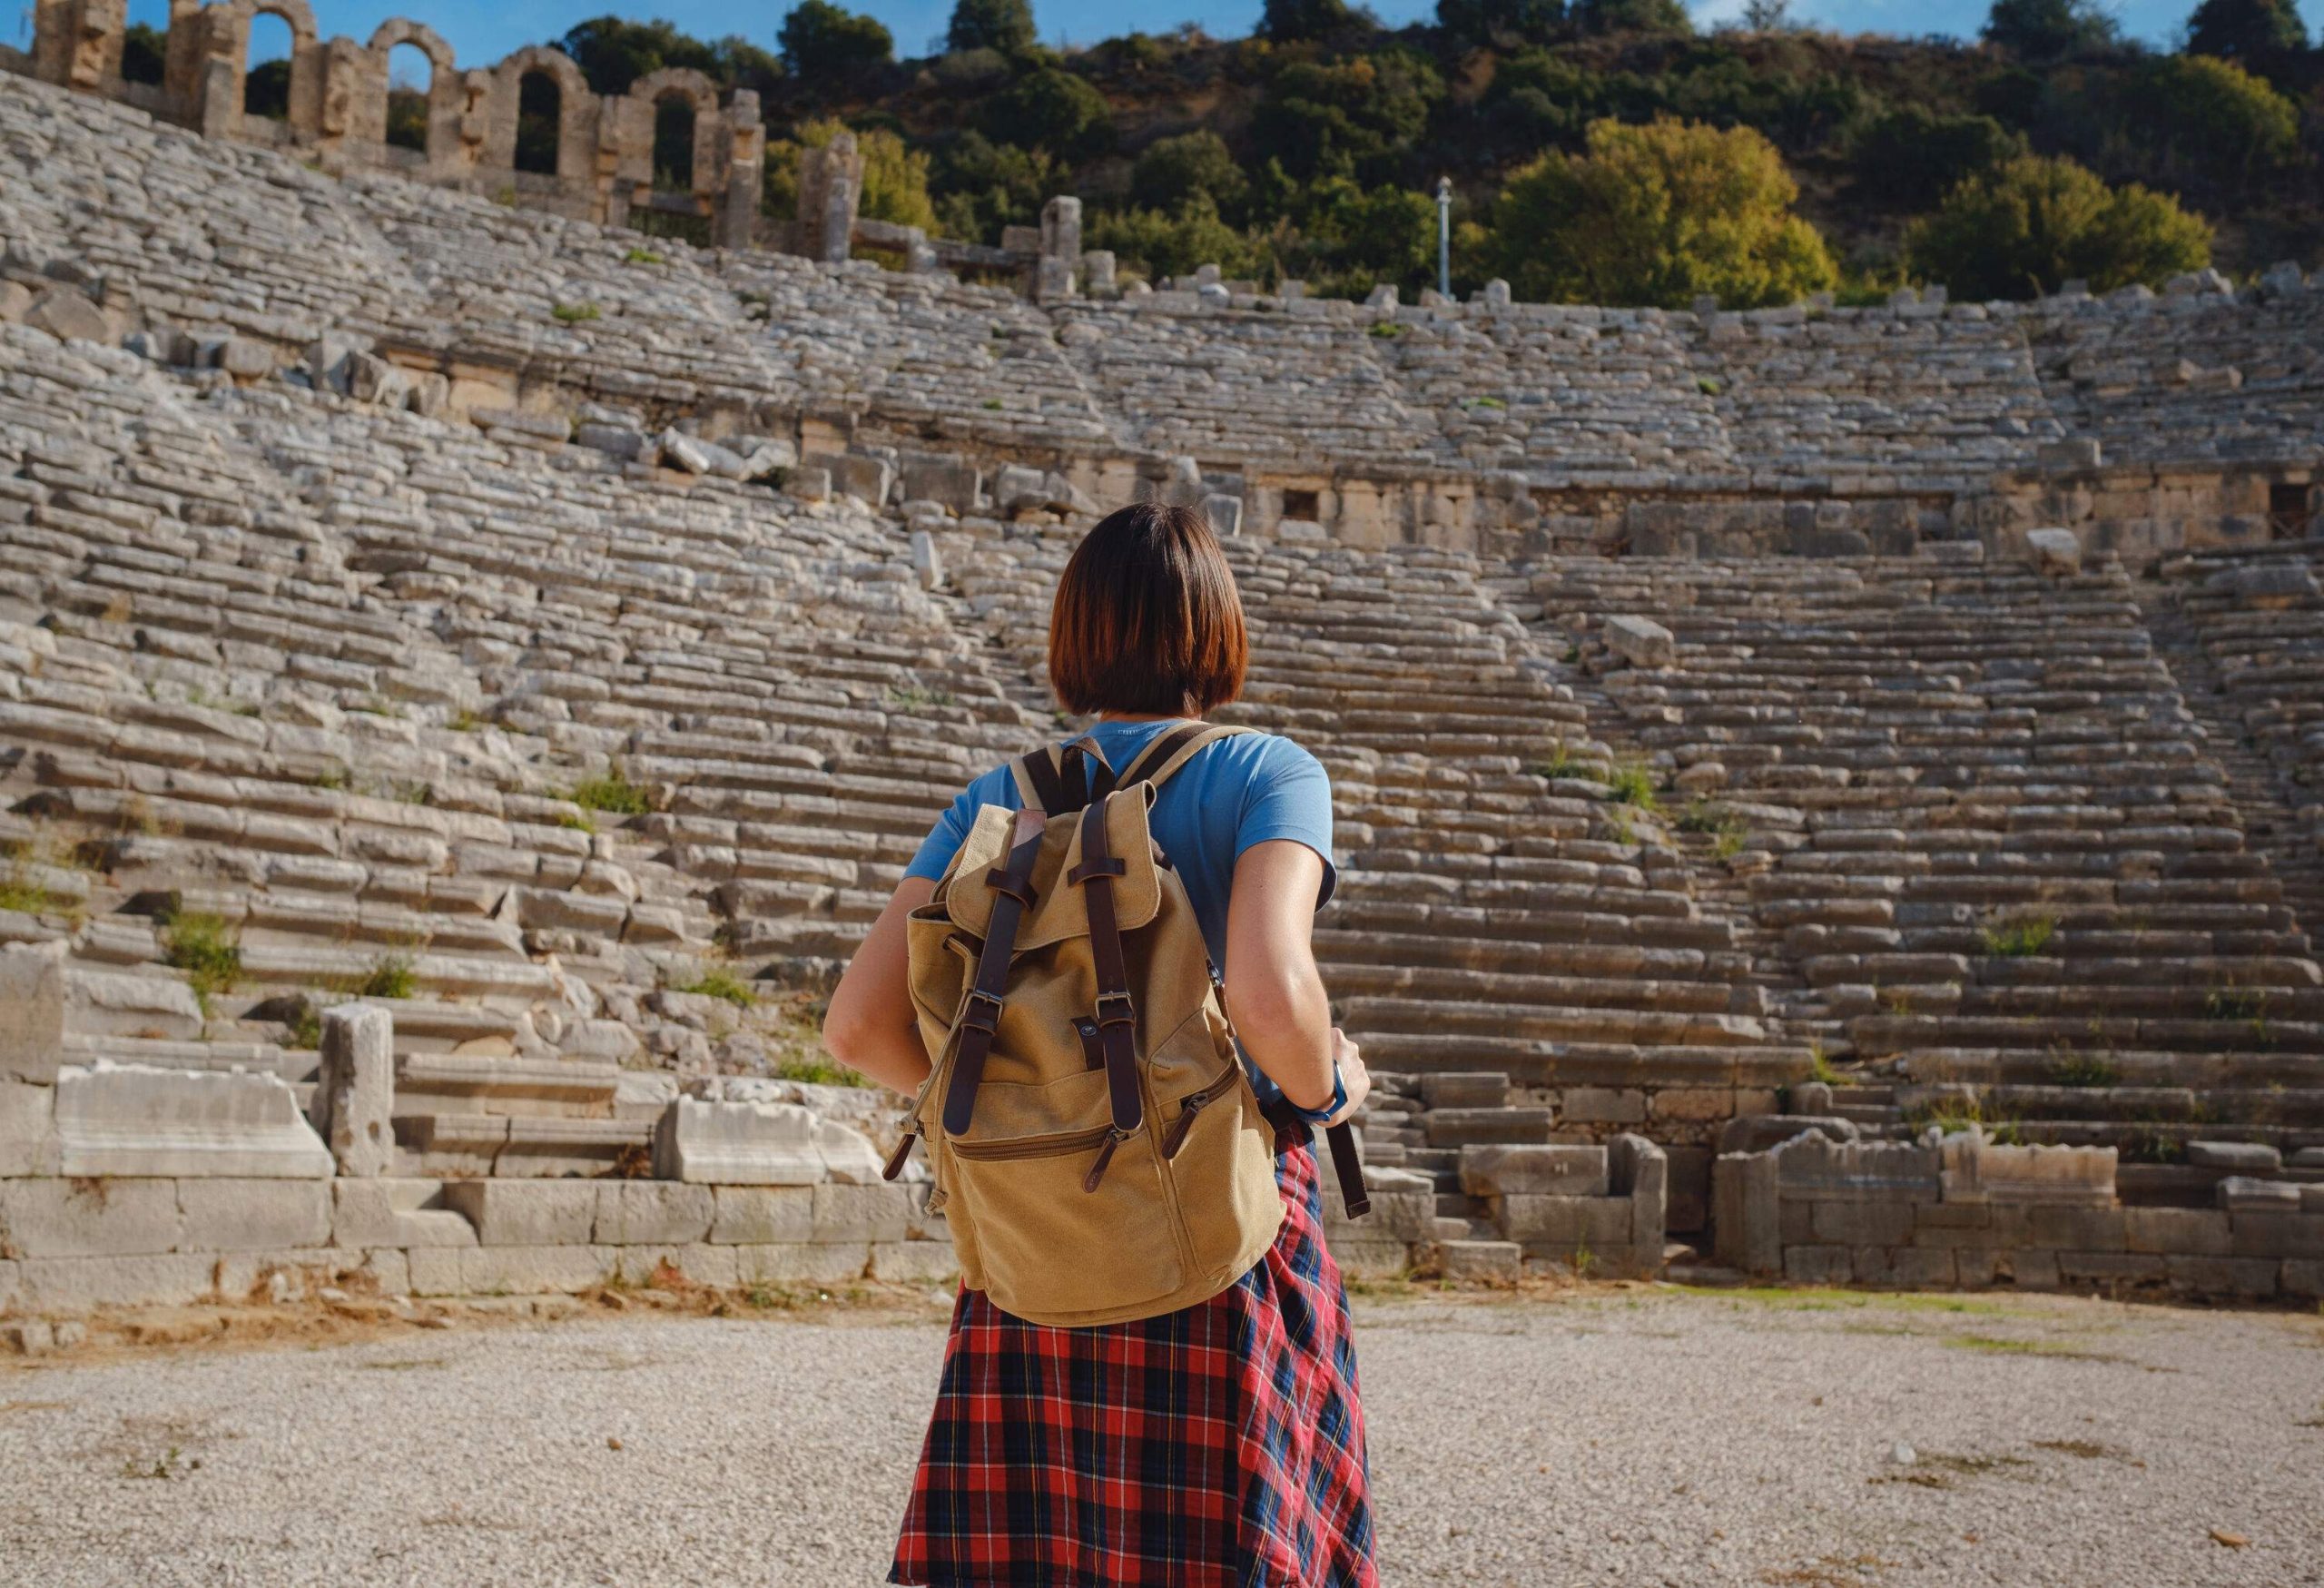 An individual stands in the centre of a ruined ancient theatre.